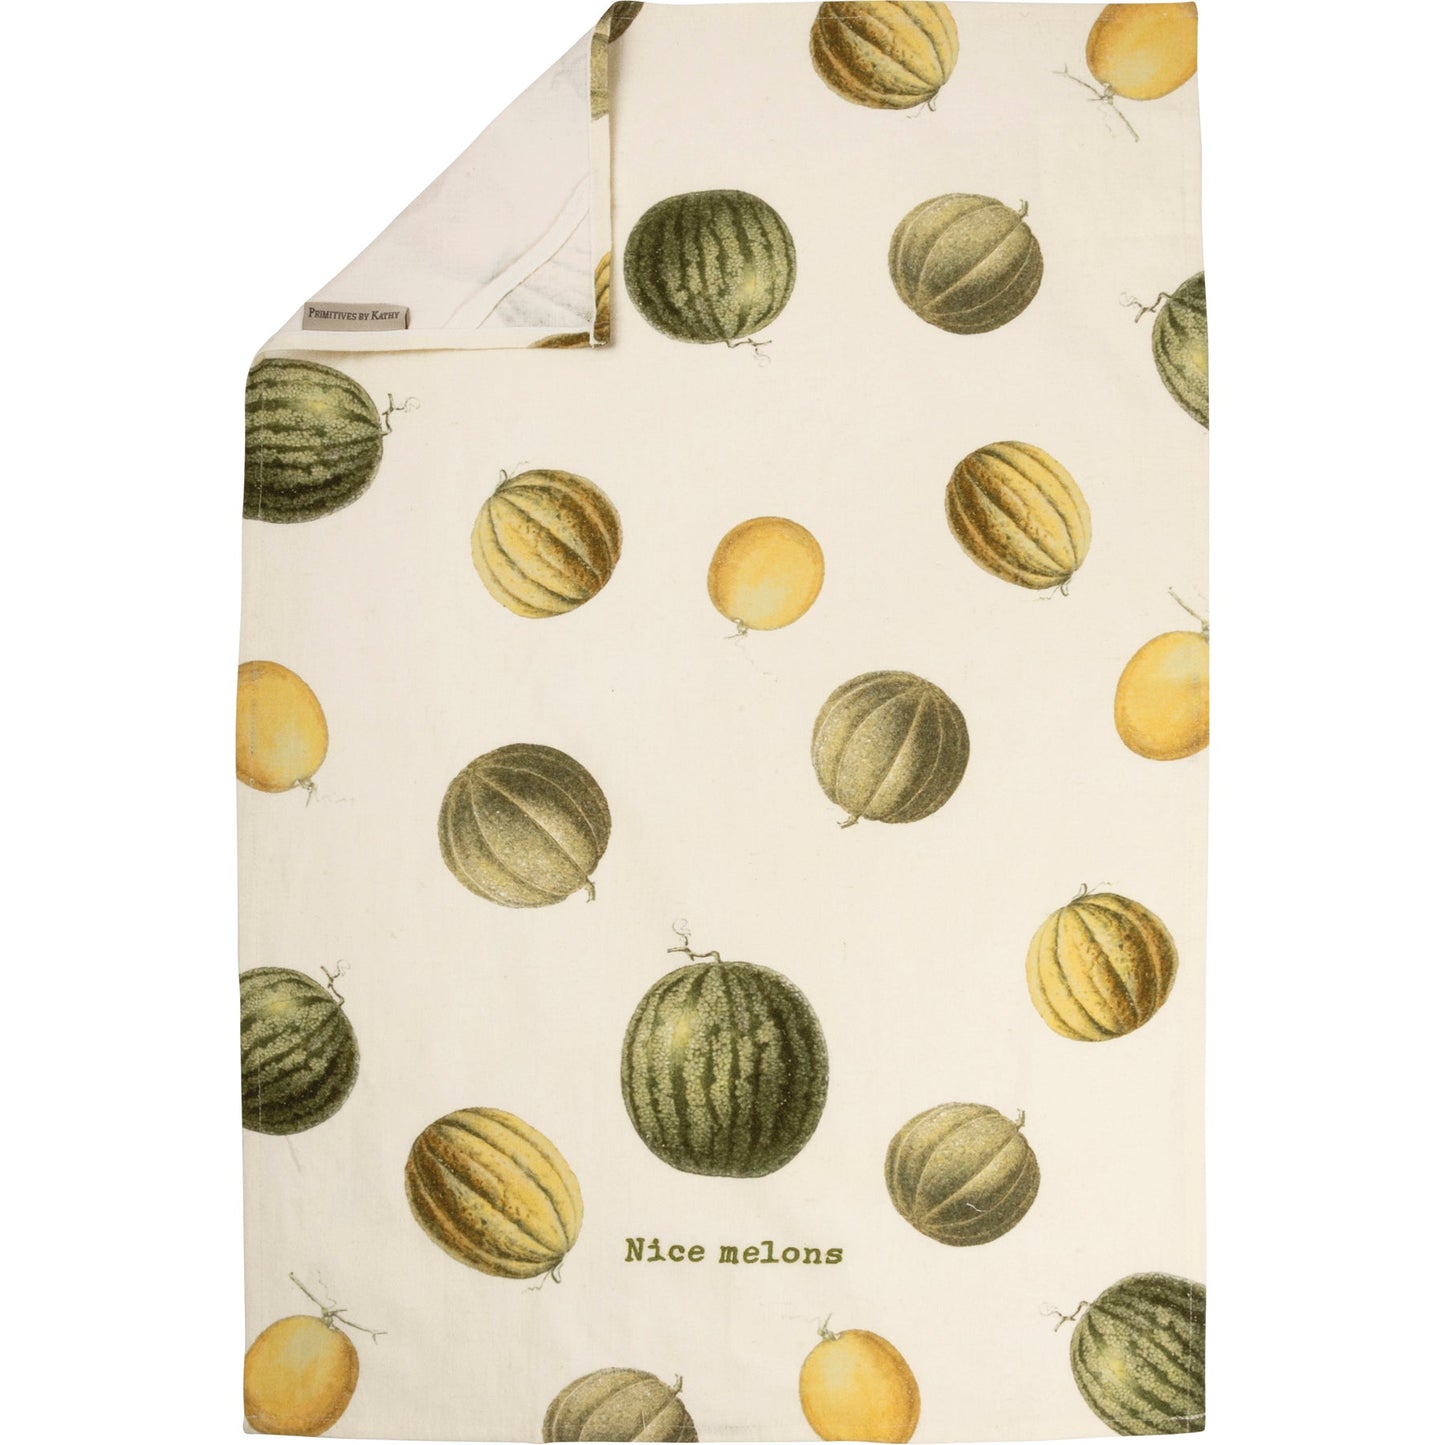 Nice Melons Dish Cloth Towel | Cotten Linen Novelty Tea Towel | Embroidered Text | 18" x 28"